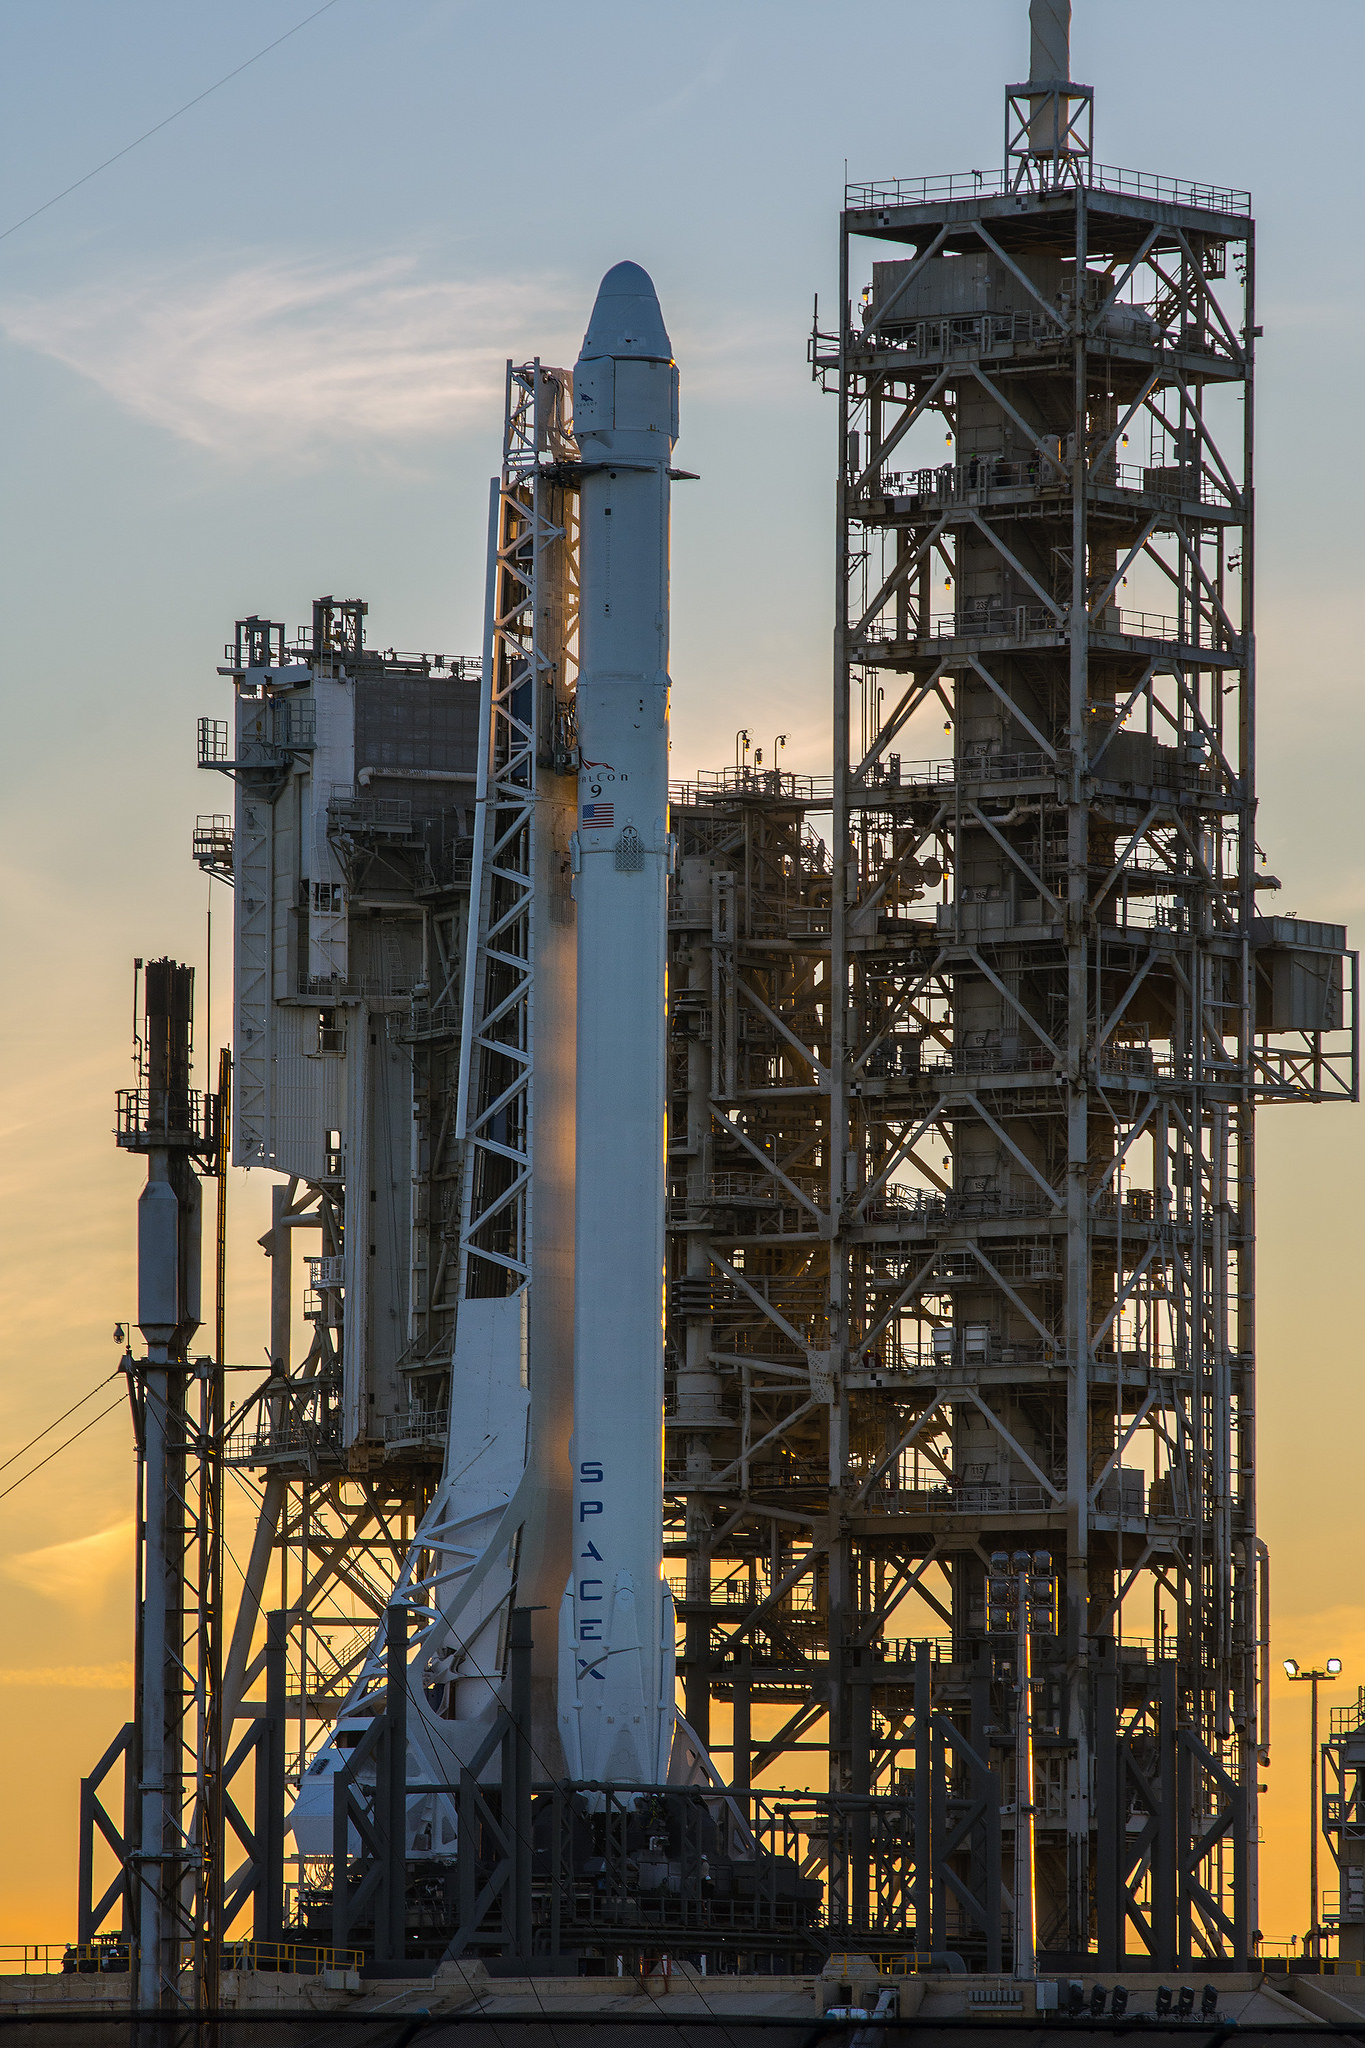 Watch Live Now! SpaceX Dragon Launching NASA Cargo @ 9:39 am ET